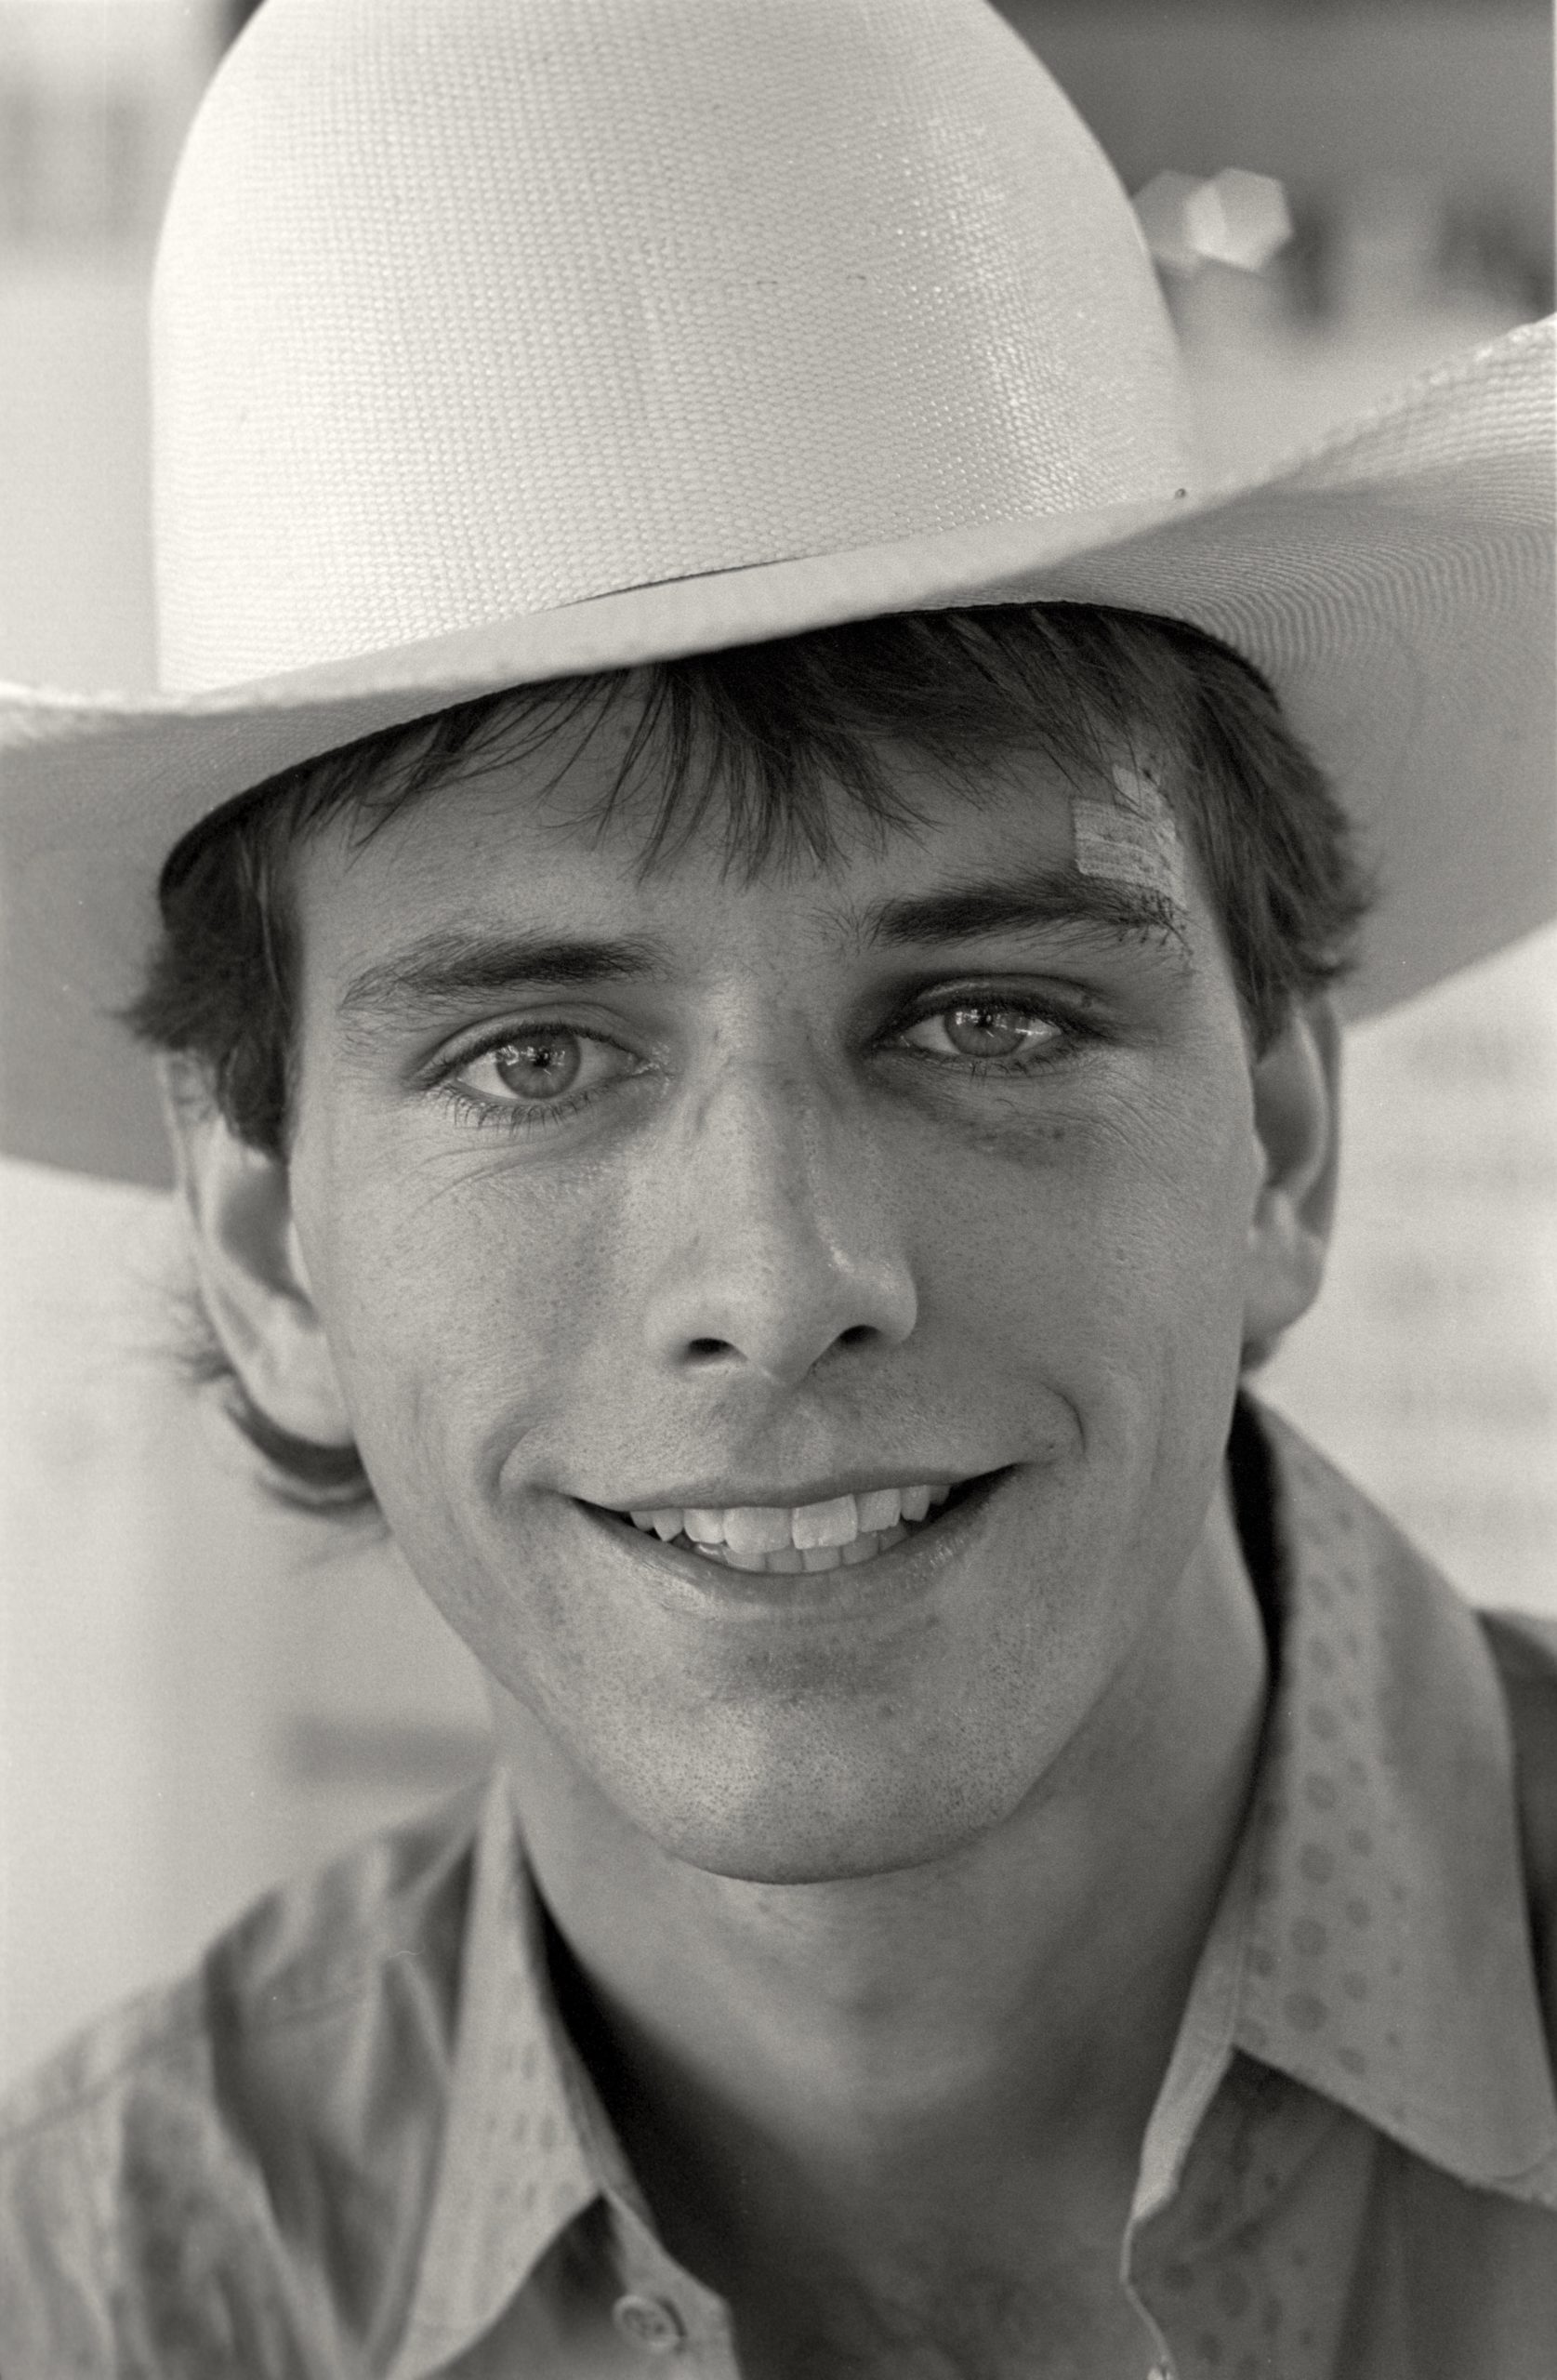 CHEYENNE, WY - JULY 1987: Professional rodeo bull rider Lane Frost headshot taken at the Cheyenne Frontier Days Arena during the Cheyenne Frontier Days rodeo on July 1987 in Cheyenne, Wyoming. (Photo by Mark Junge/Getty Images)